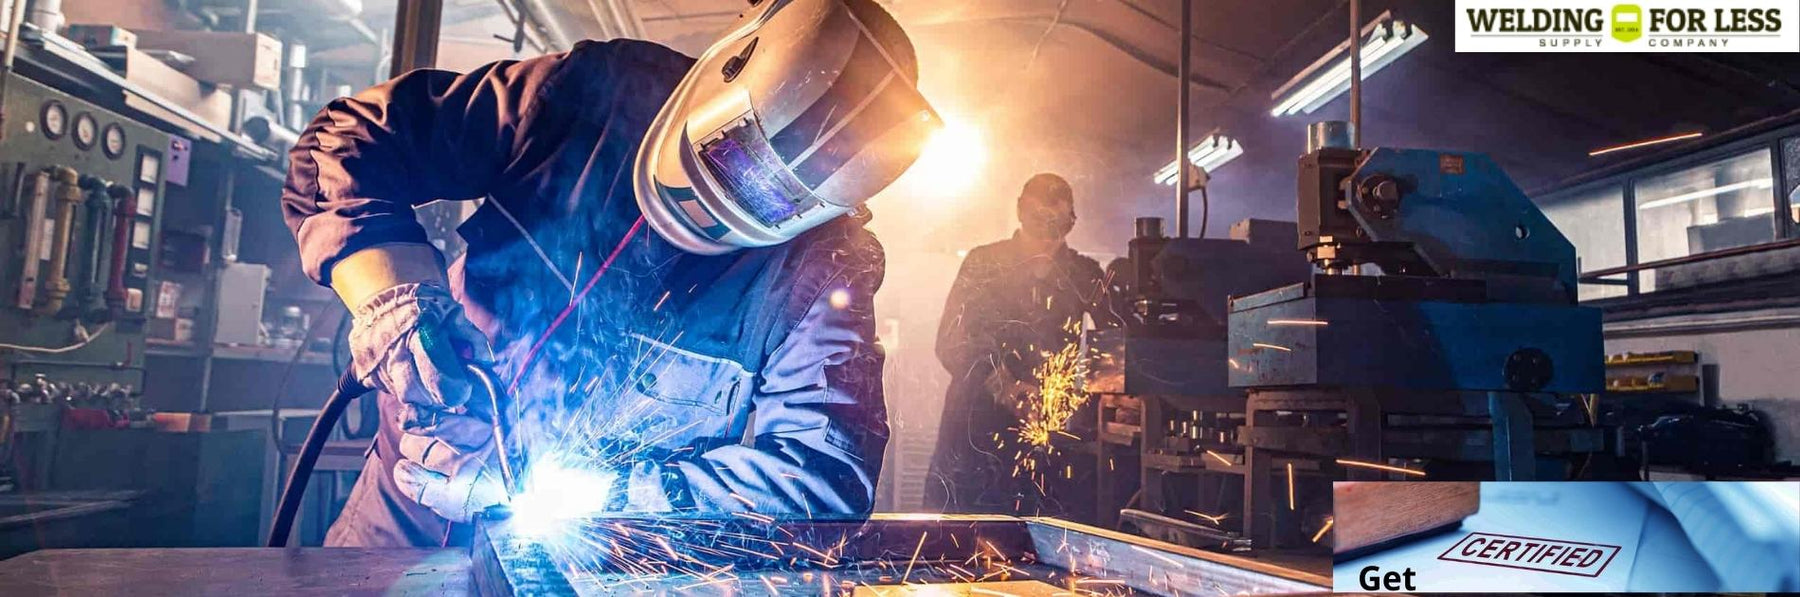 How to become a certified welder